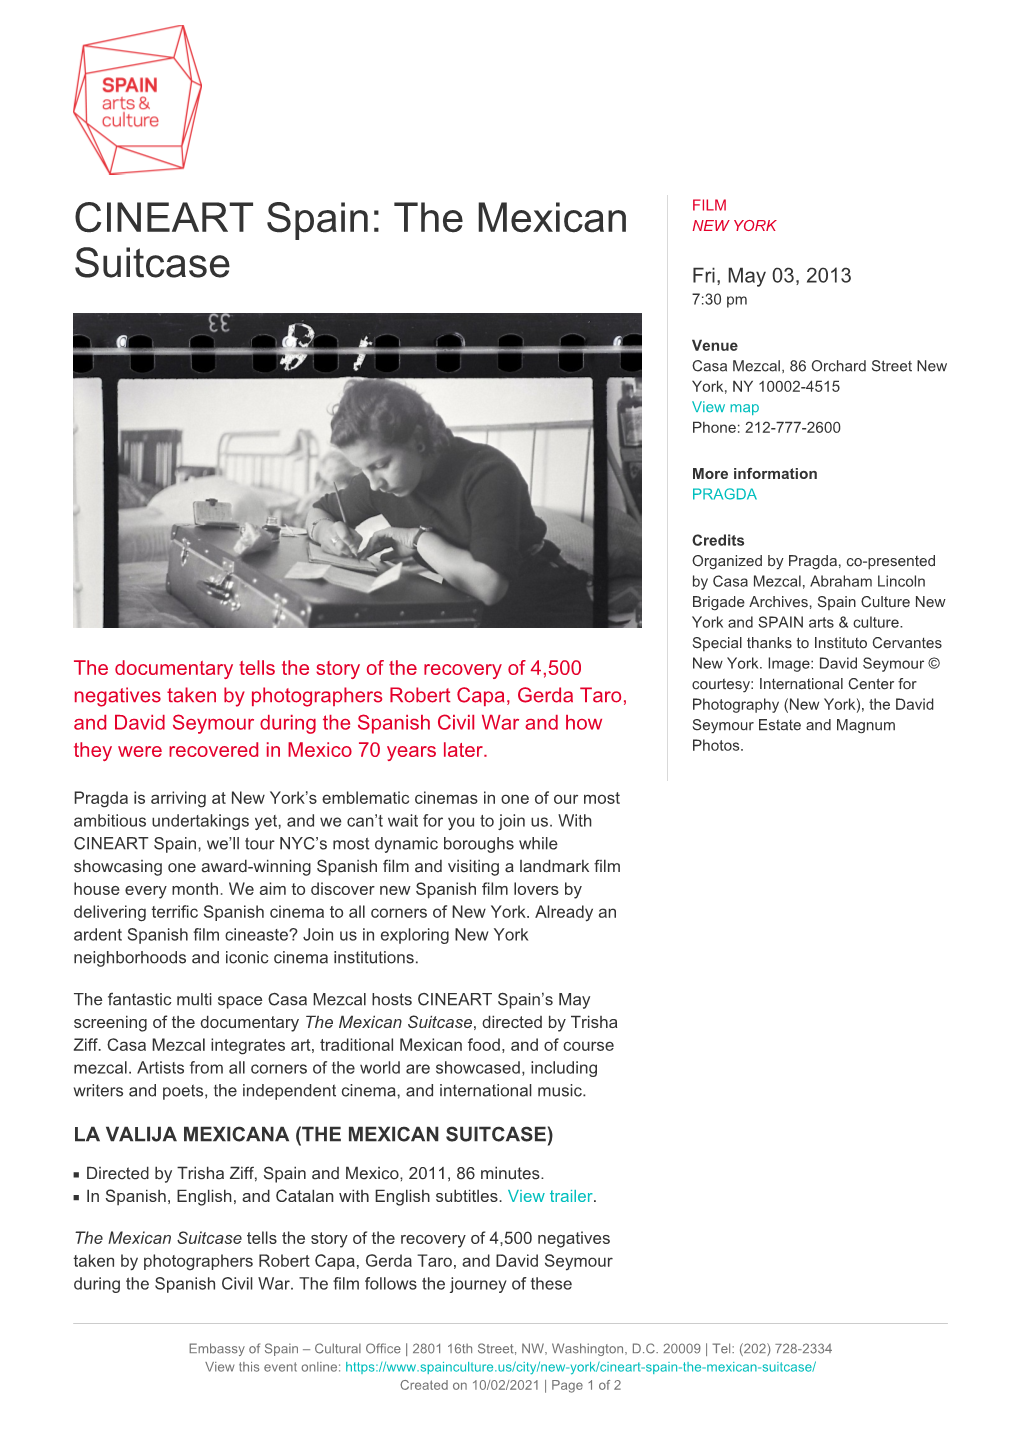 CINEART Spain: the Mexican Suitcase